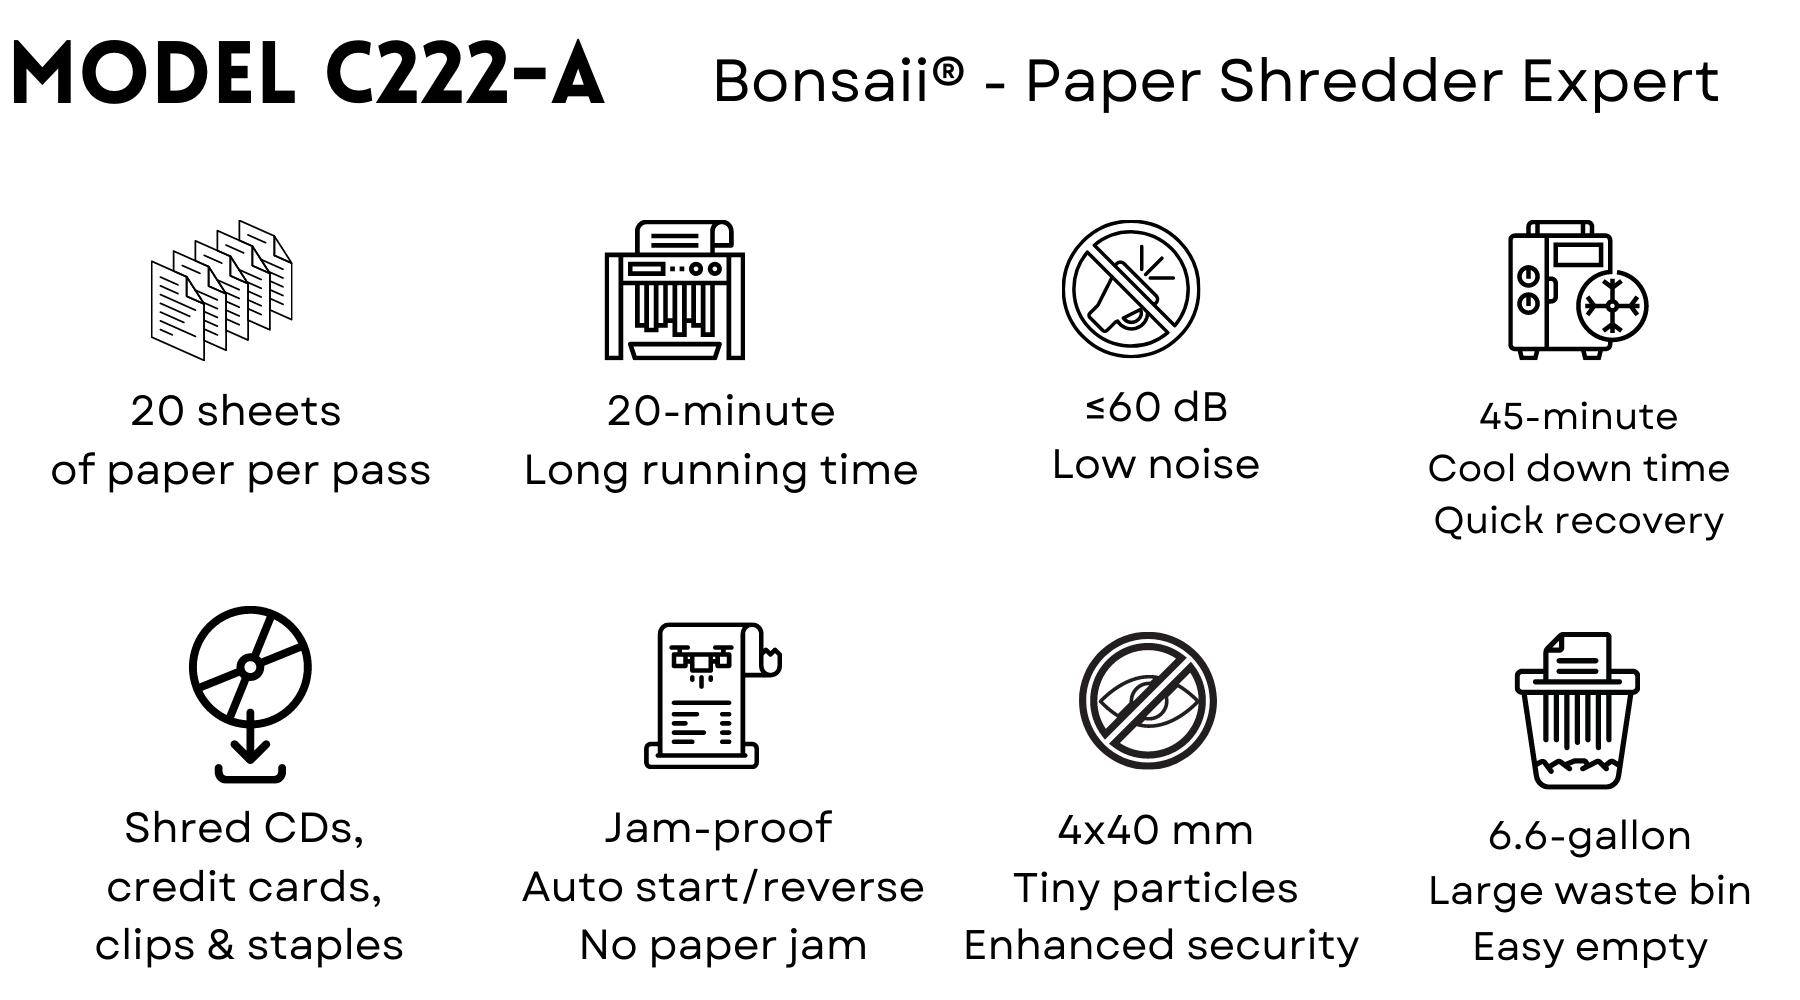 Bonsaii C222-A paper shredder helps people cut paper into tiny fine particles. Government organizations, businesses, and private individuals use shredders to destroy private, confidential, or otherwise sensitive documents.  Shredding paper helps to keep us in compliance with the law, to protect forests, to prevent identity theft, and to rid clutter and fire hazards. They provide a Confidential Waste Disposal service and enable paper shredding, document shredding, document destruction and Shredders which are reliable and secure.  Shredders usually either cut the paper into strips or confetti-like squares. When paper (or another object) touches the cutting head, a sensor activates and the sharp teeth or knives rotate and pull the paper into their jaws until the paper lies pathetically in pieces in the bin.  Bonsaii C222-A paper shredder's main features:  20 minutes of continuous running time before a cool down period is needed allowing you to complete shredding jobs in one sitting Advanced Cooling System and patented Cutting Technology Touch screen control panel for easy operation  Cross-cut shreds up to 20 sheets(Letter Size) at a time, turn the papers into tiny cross-cut particles measuring 5/32 x 1-37/64 inches (4 x 40mm), P-4 high-security level   Shreds credit cards, CDs, DVDs, small paper clips and staples  60 dB low noise, quiet and smooth shredding  Removable and lockable casters for great mobility  Auto-start and auto-reverse functions avoid paper jams  Overheat and overload protection technology keep your shredder in a good condition and extend its lifespan 6.6-gallon pull-out waste bin for less frequency of emptying, check the fullness of the bin through the built-in transparent window   Free shipping in the United States 30-day return, 36-month machine, 7-year cutter warranty Guaranteed safe checkout with Paypal and other trusted payments Specialized in manufacturing paper shredders since 2005